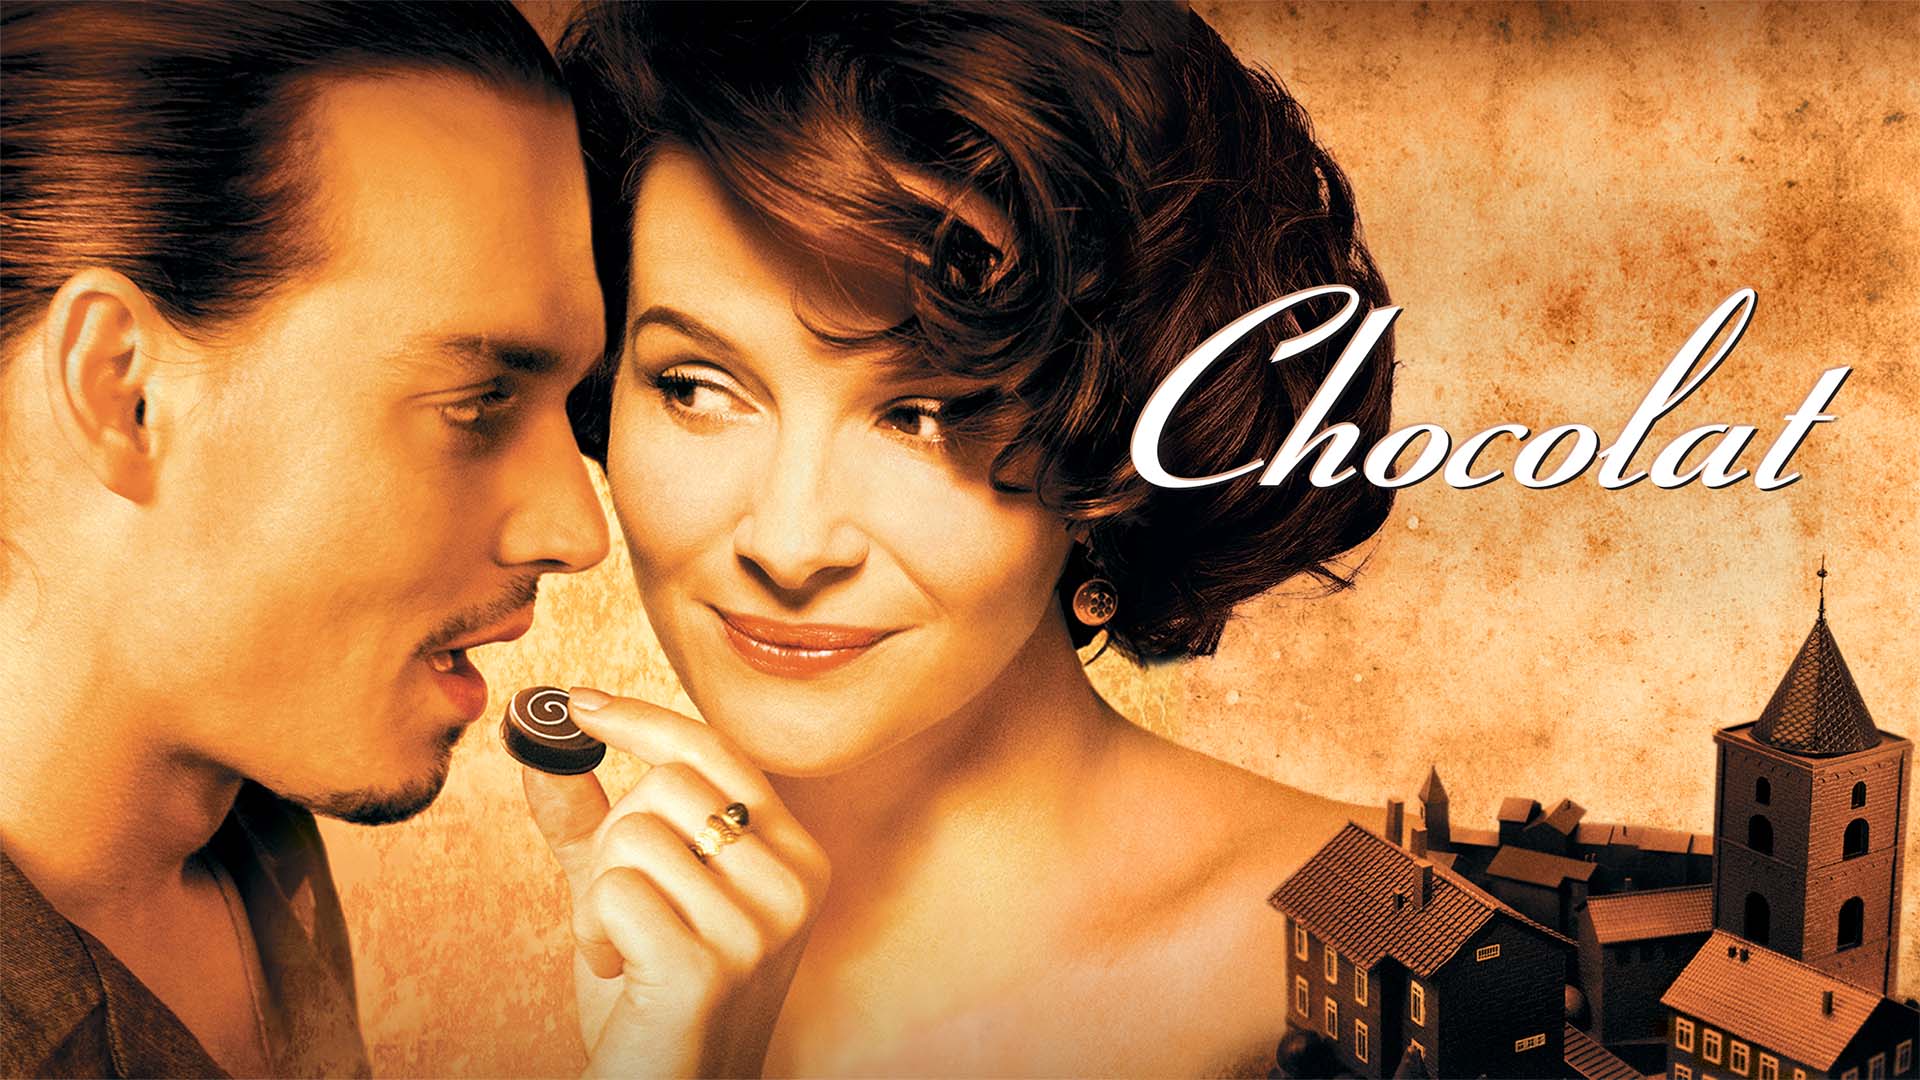 31 Facts about the movie Chocolat - Facts.net